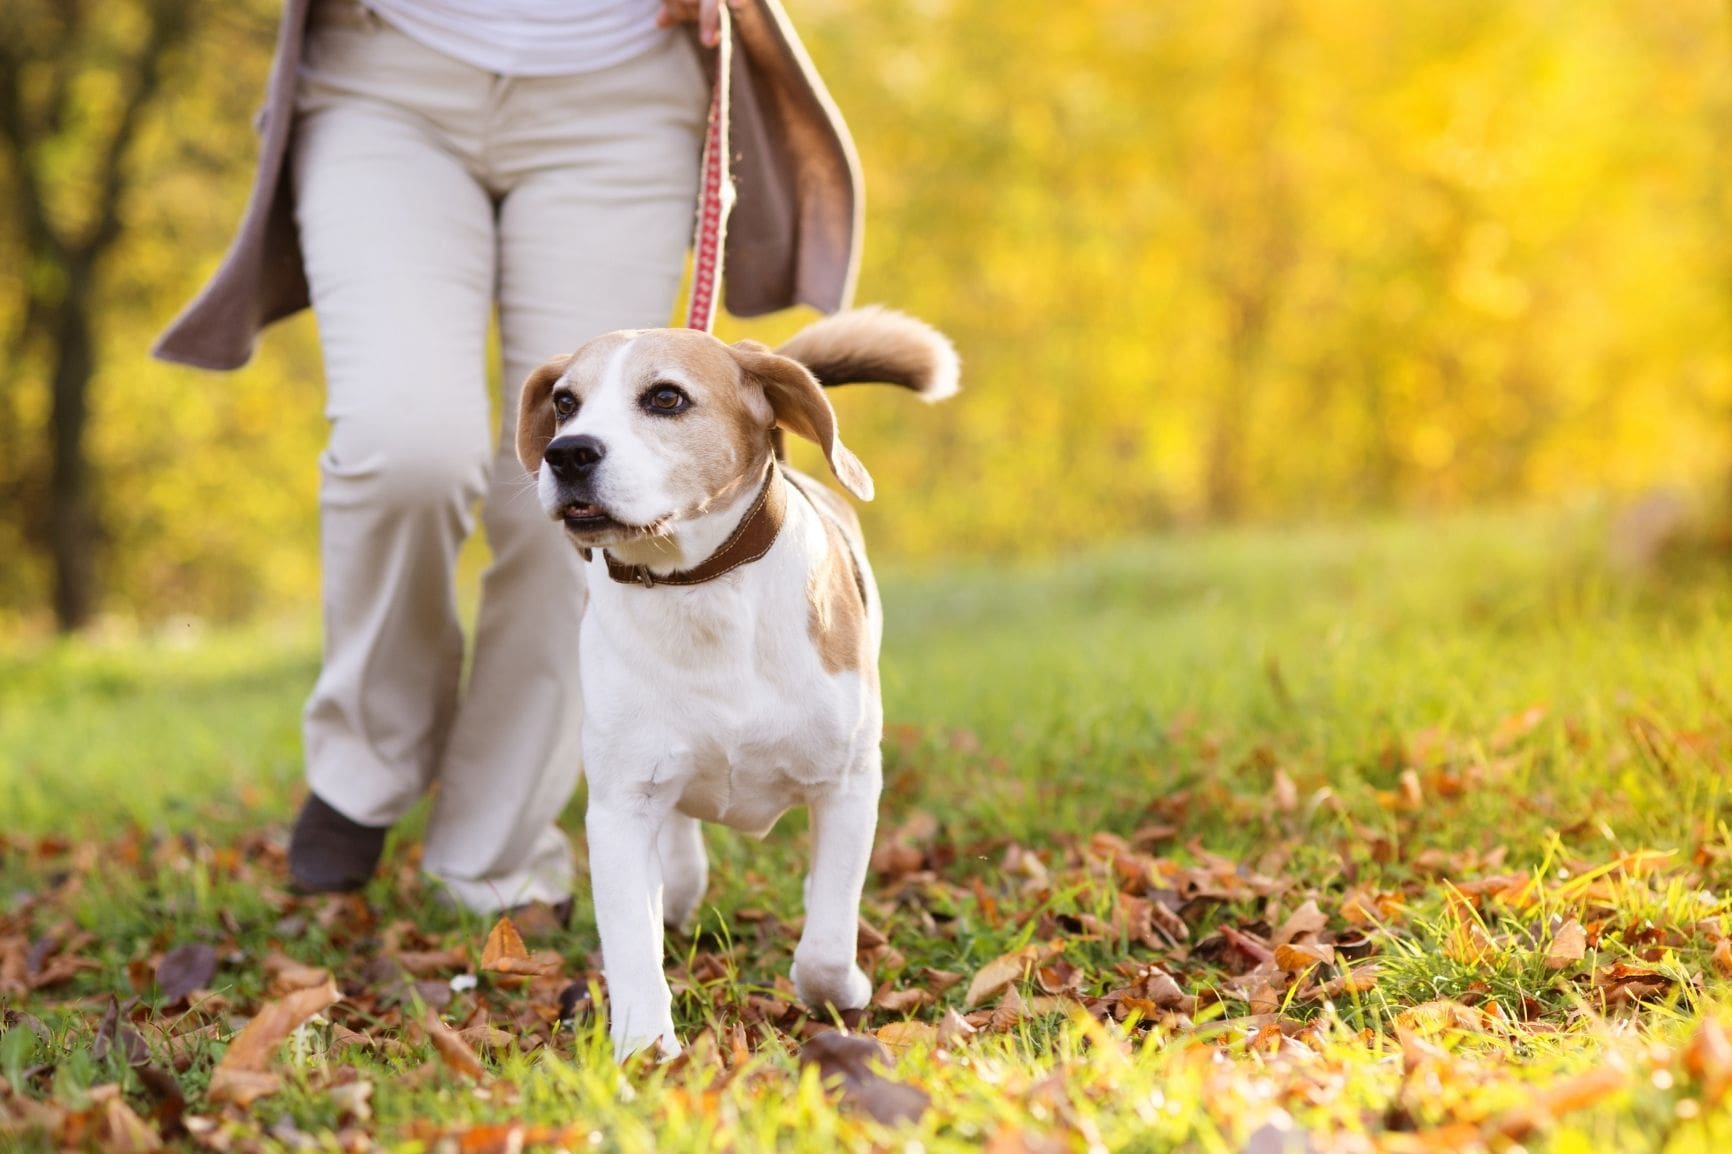 Here are 5 benefits of walking your dog every day, regardless of the season